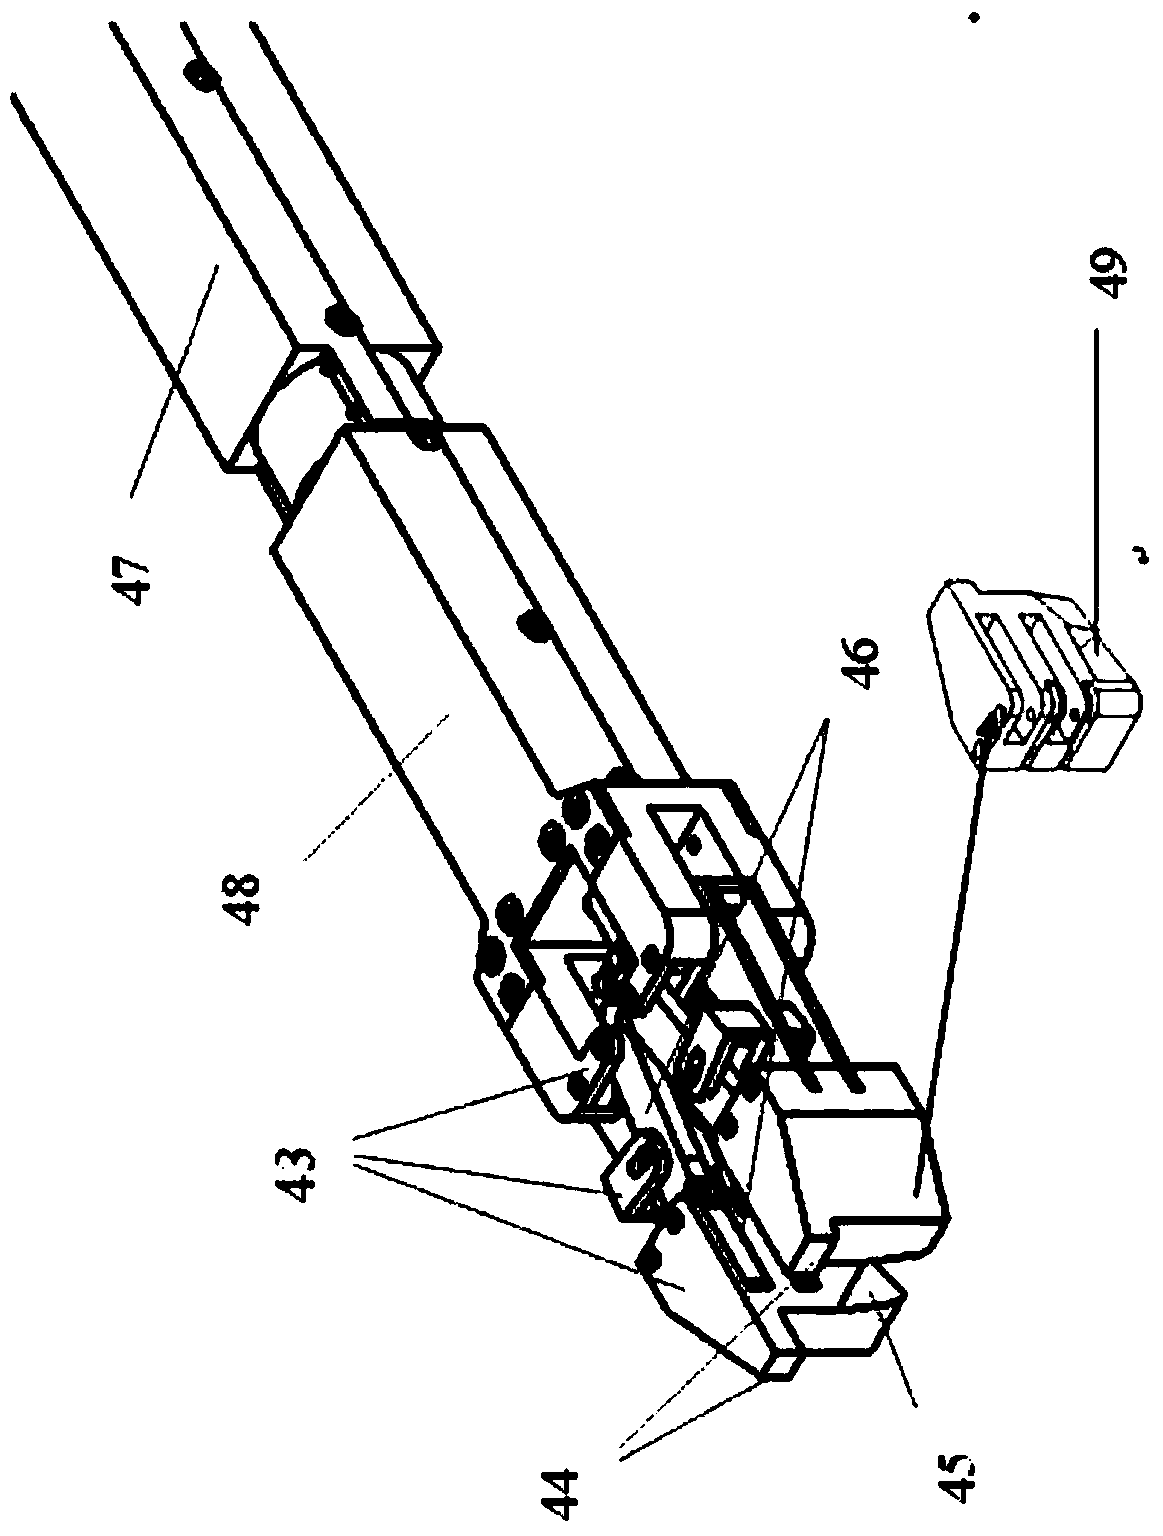 Tail end structure of multipurpose manipulator